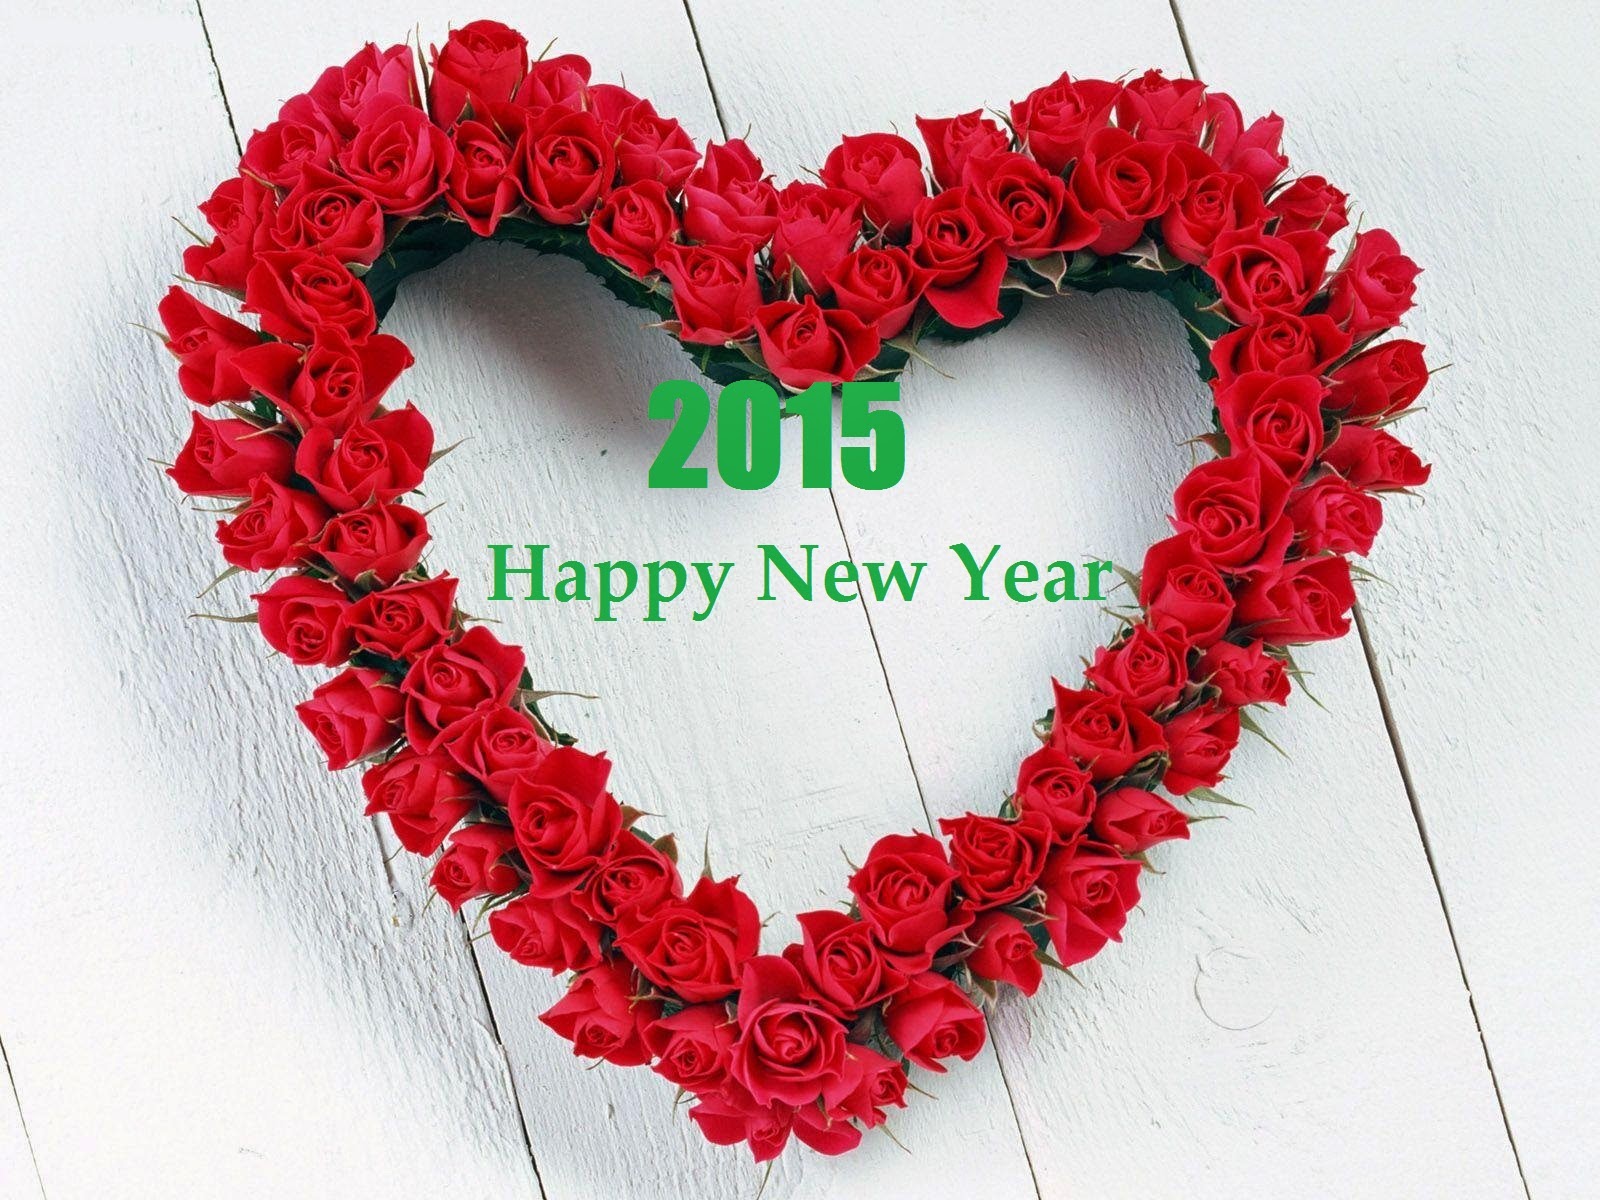 Heart Shape Roses New Year Greetings Latest Wallpaper - Hair Salon Valentine's Day , HD Wallpaper & Backgrounds